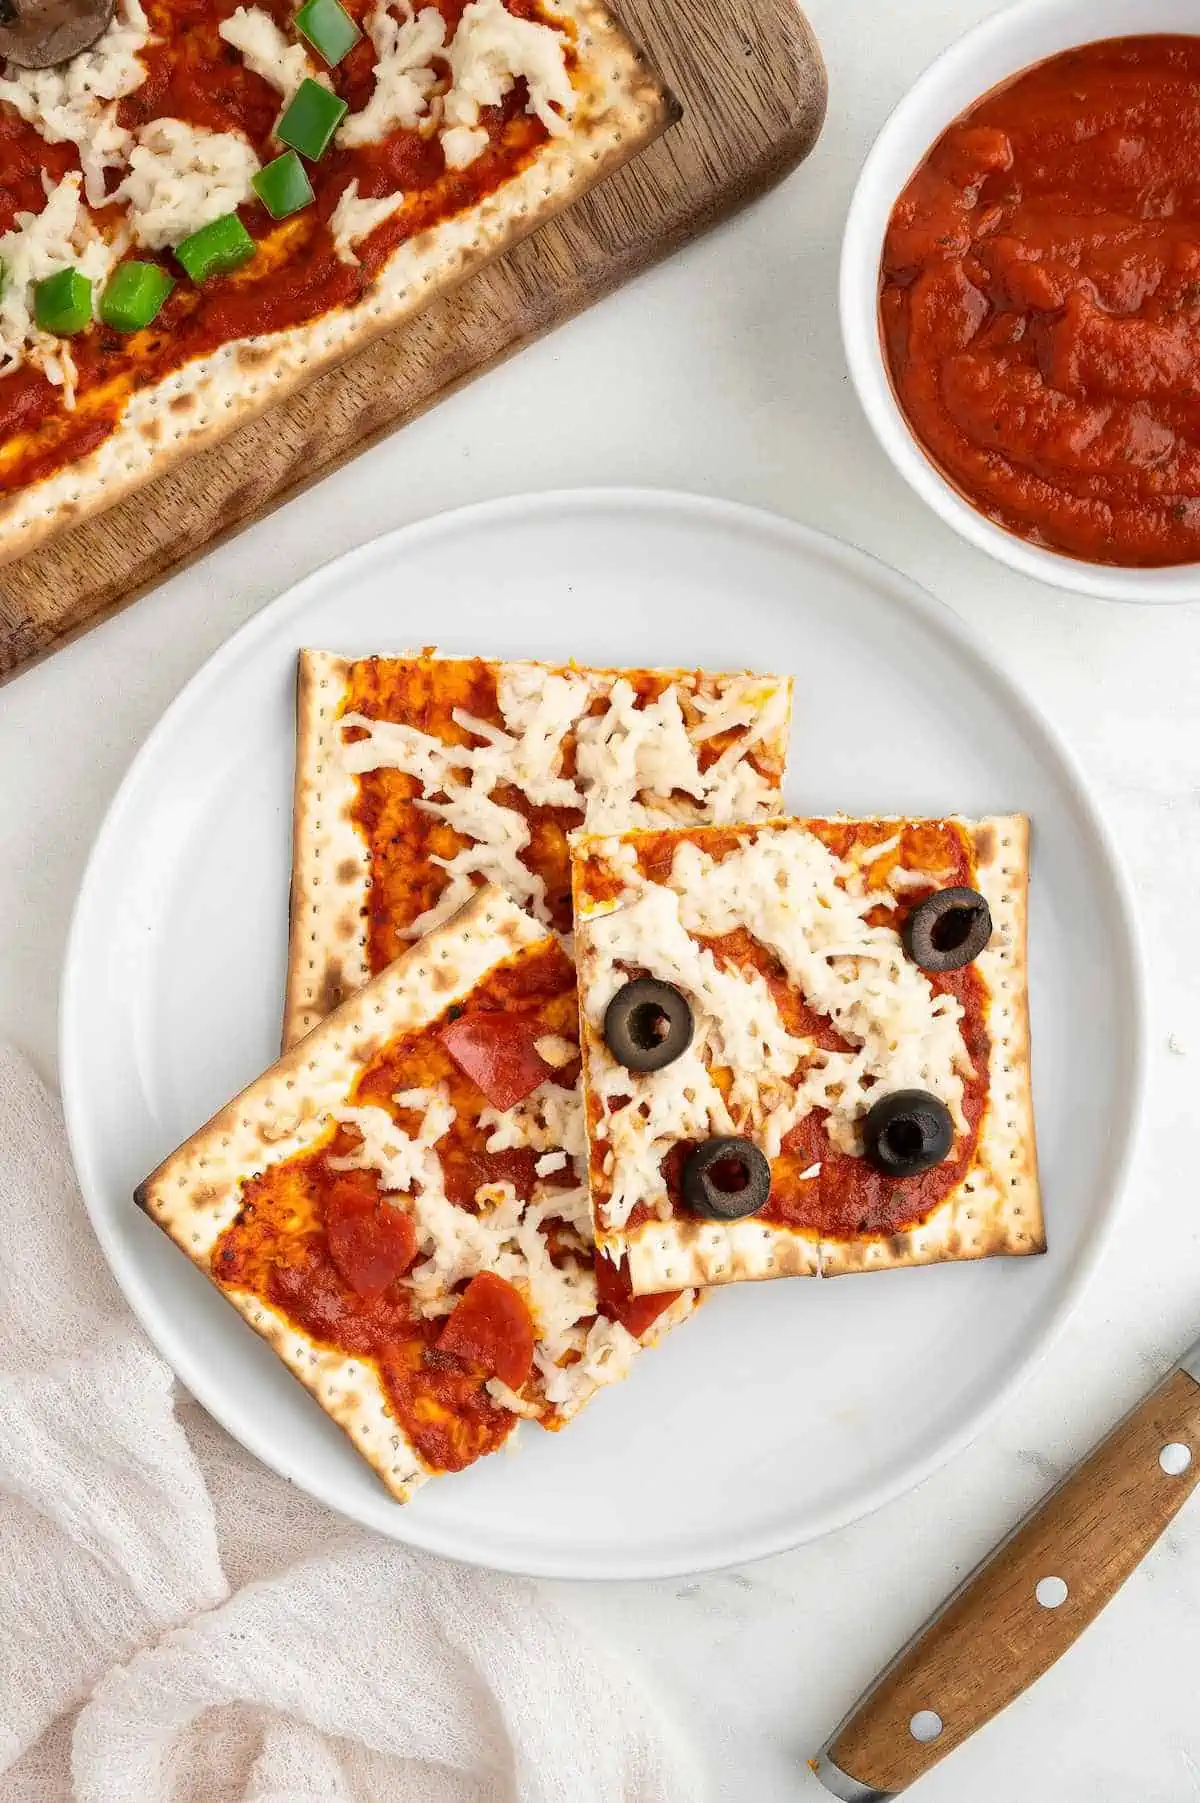 Three slices of matzah pizza topped with olives and vegan pepperoni on a plate.